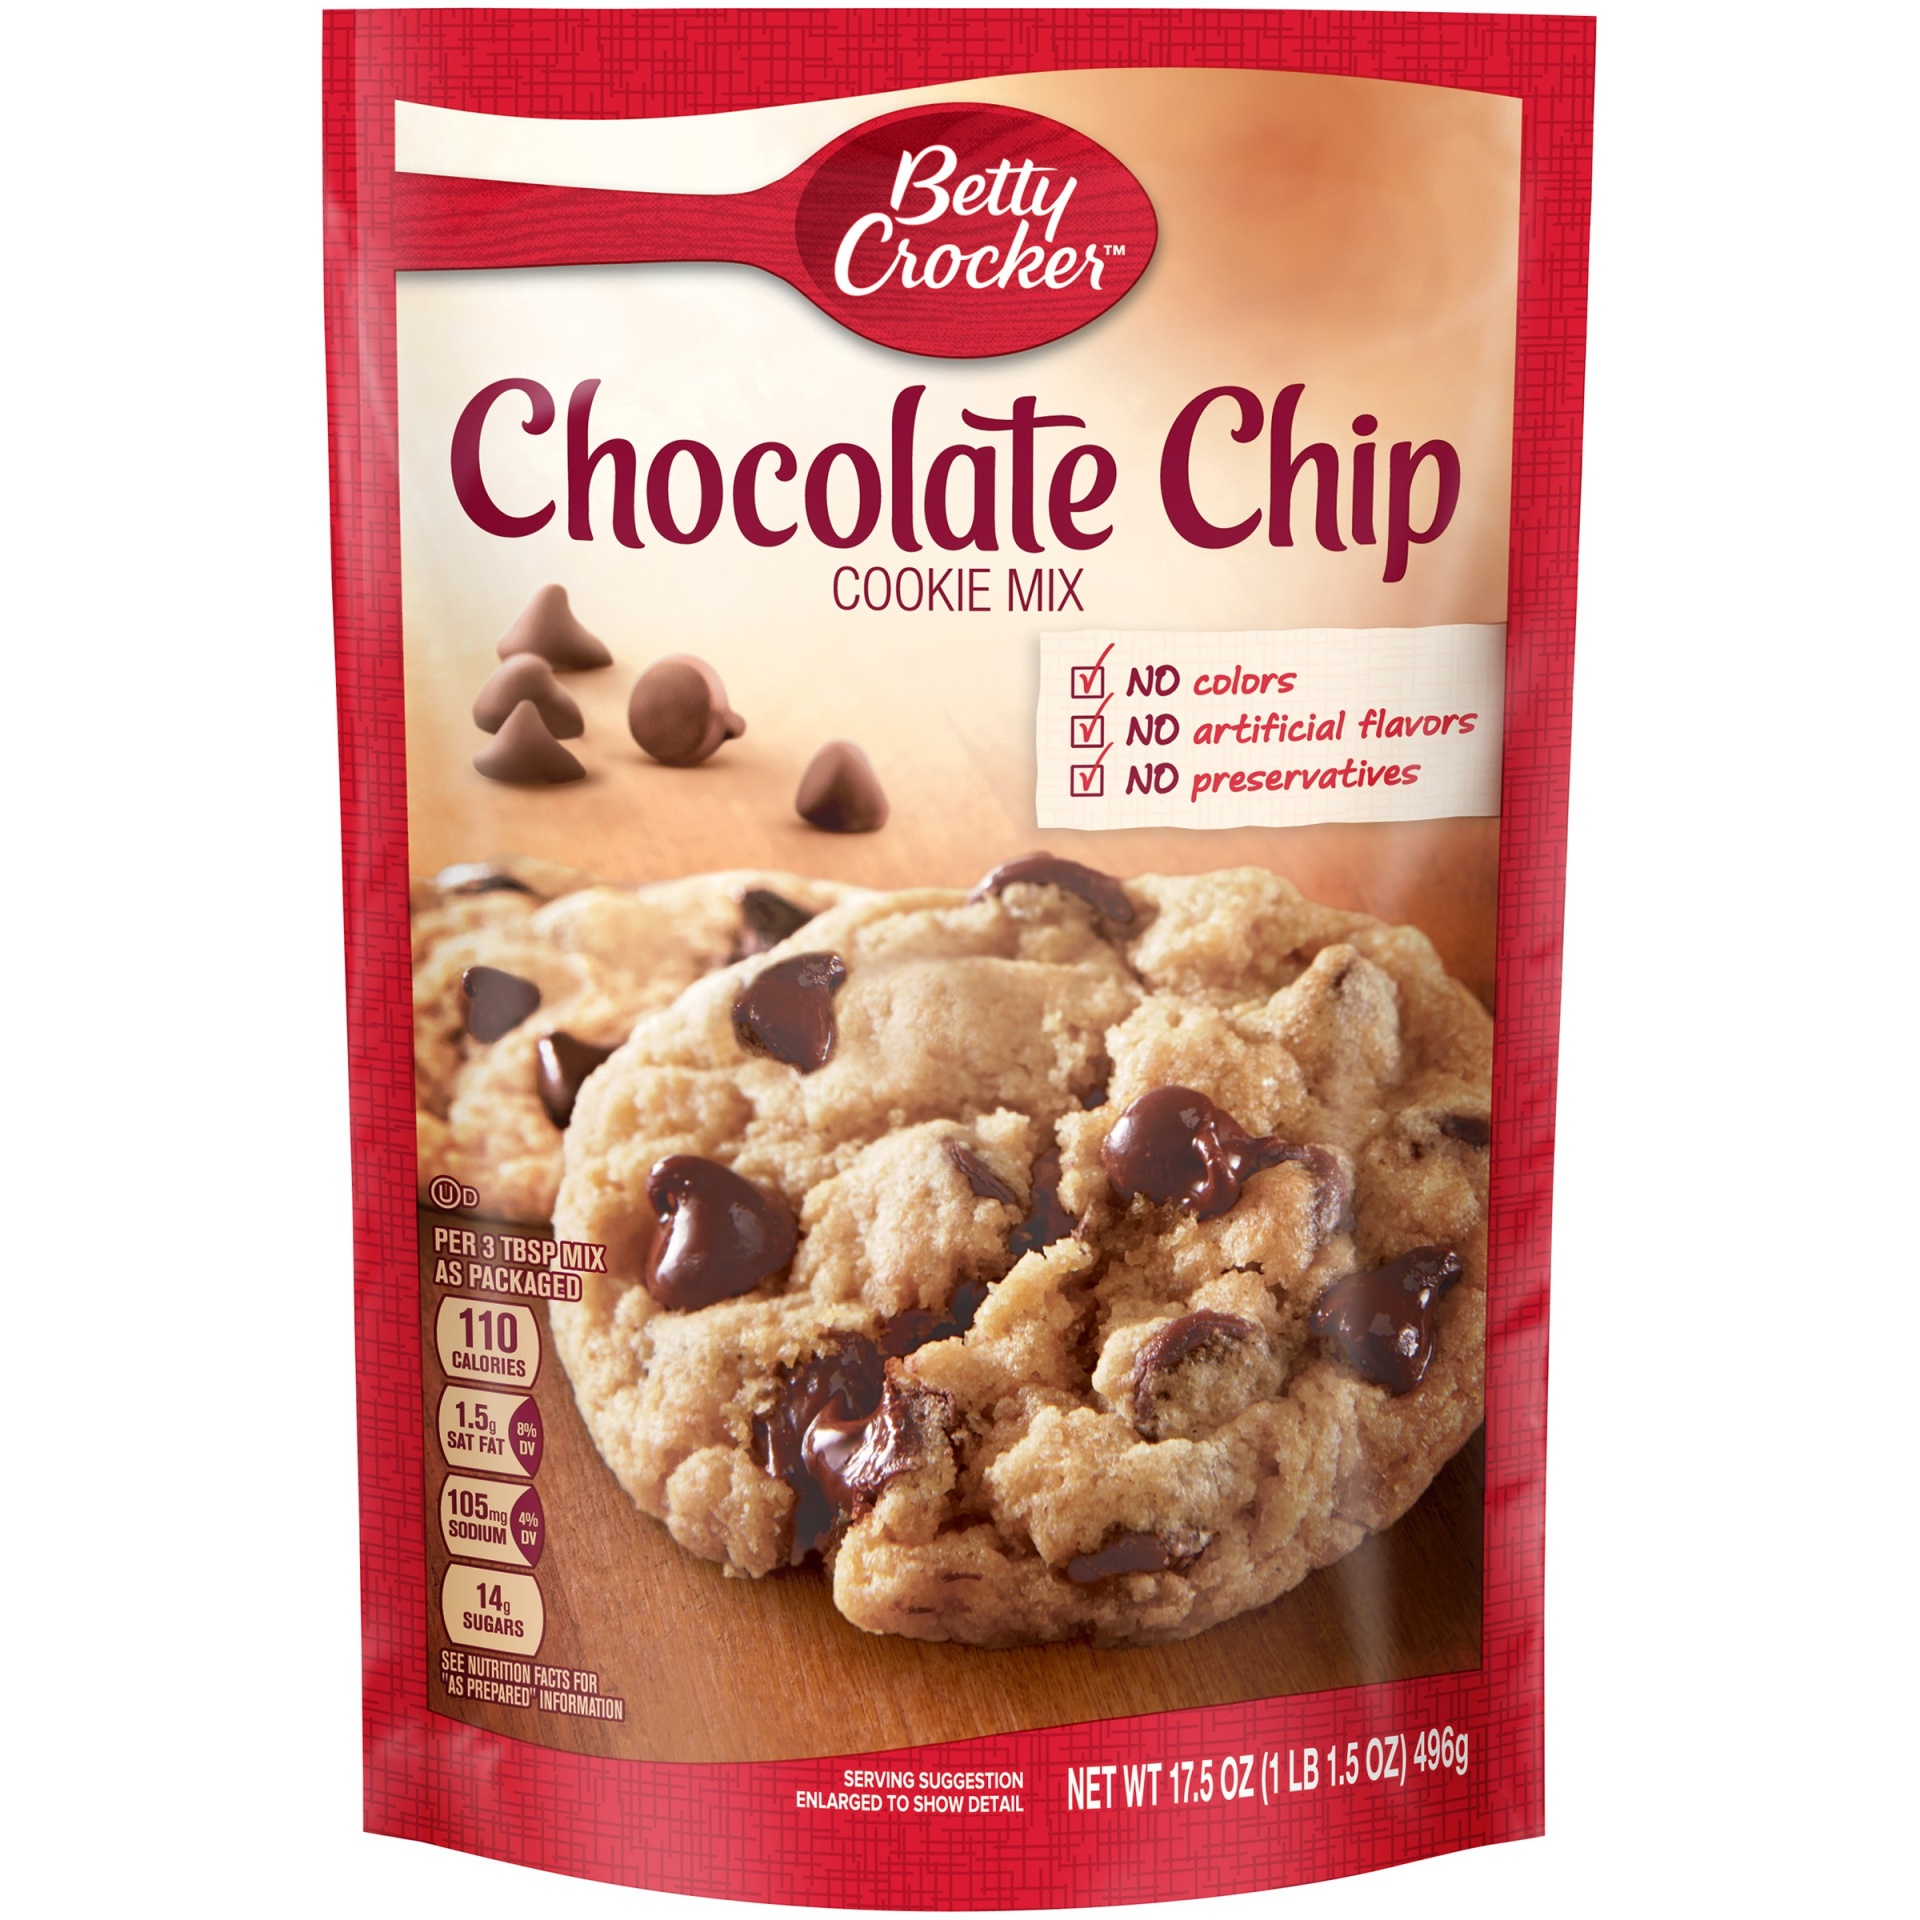 slide 1 of 4, General Mills Cookie Mix Chocolate Chip, 17.5 oz